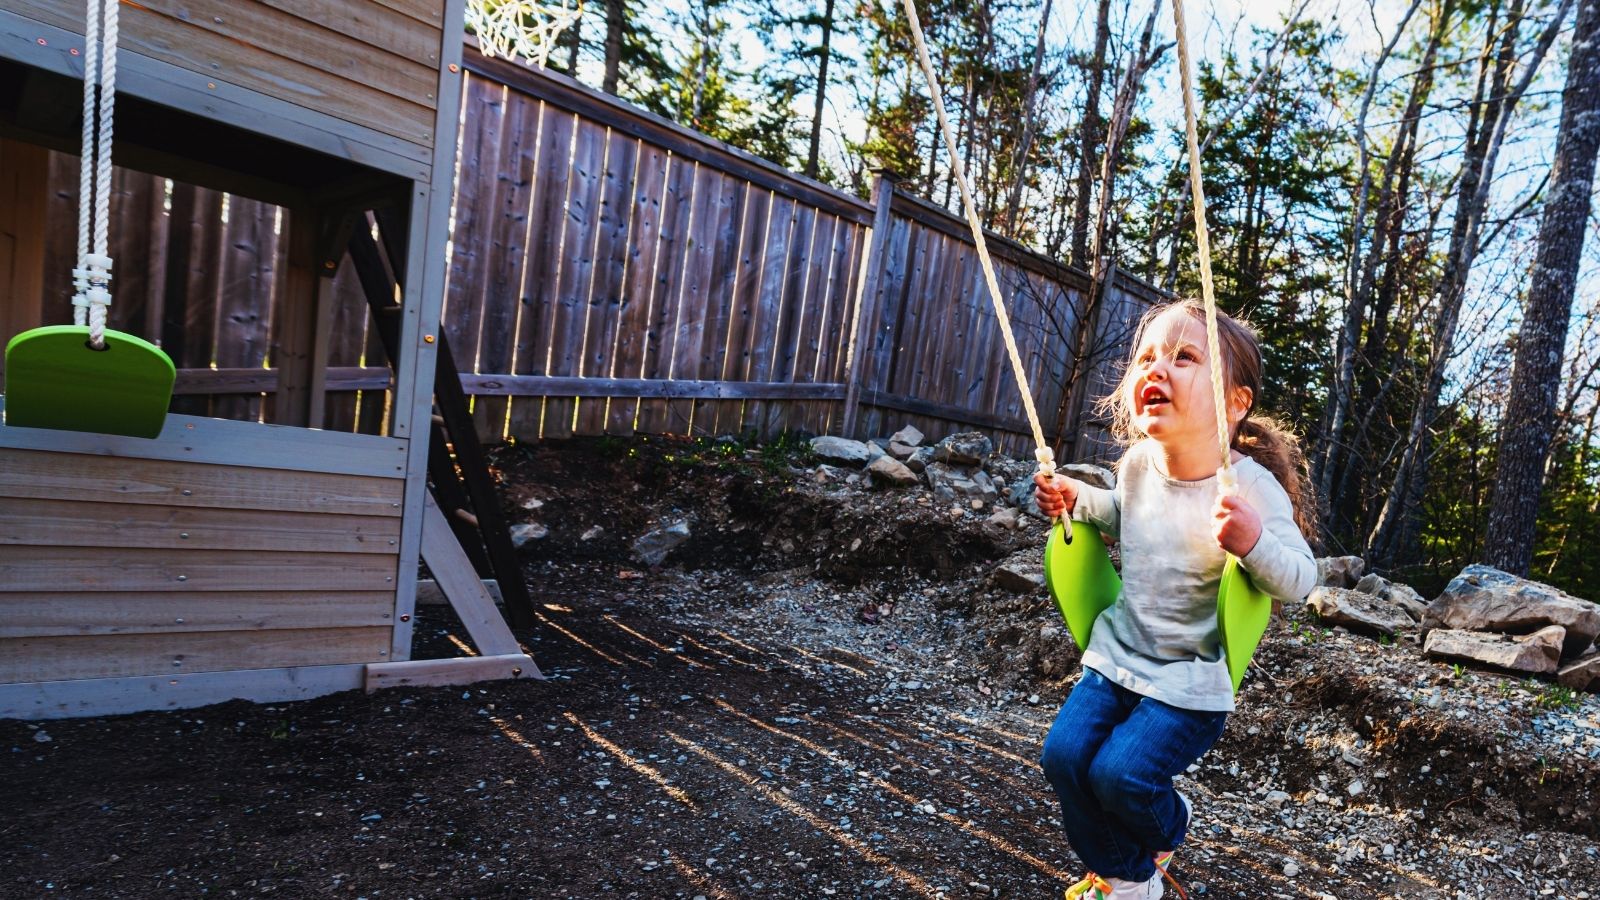 Building a Playground in Your Backyard